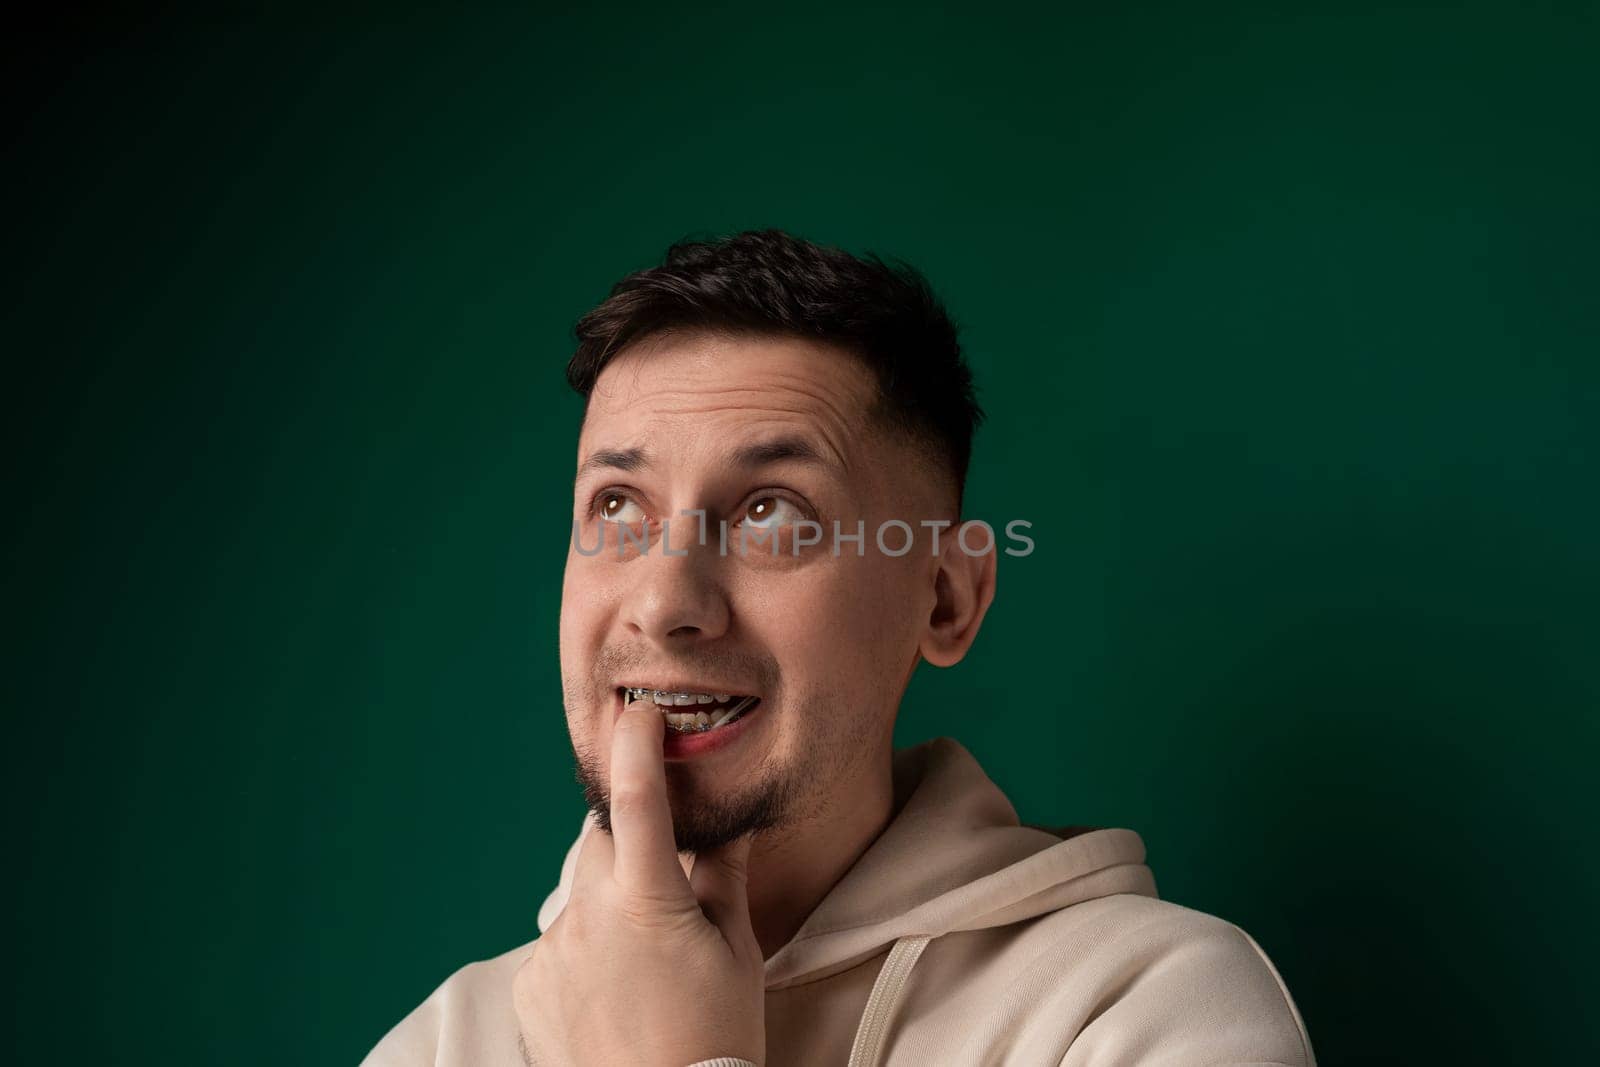 A man contorts his face comically as he uses his finger to manipulate his features, creating a humorous expression.